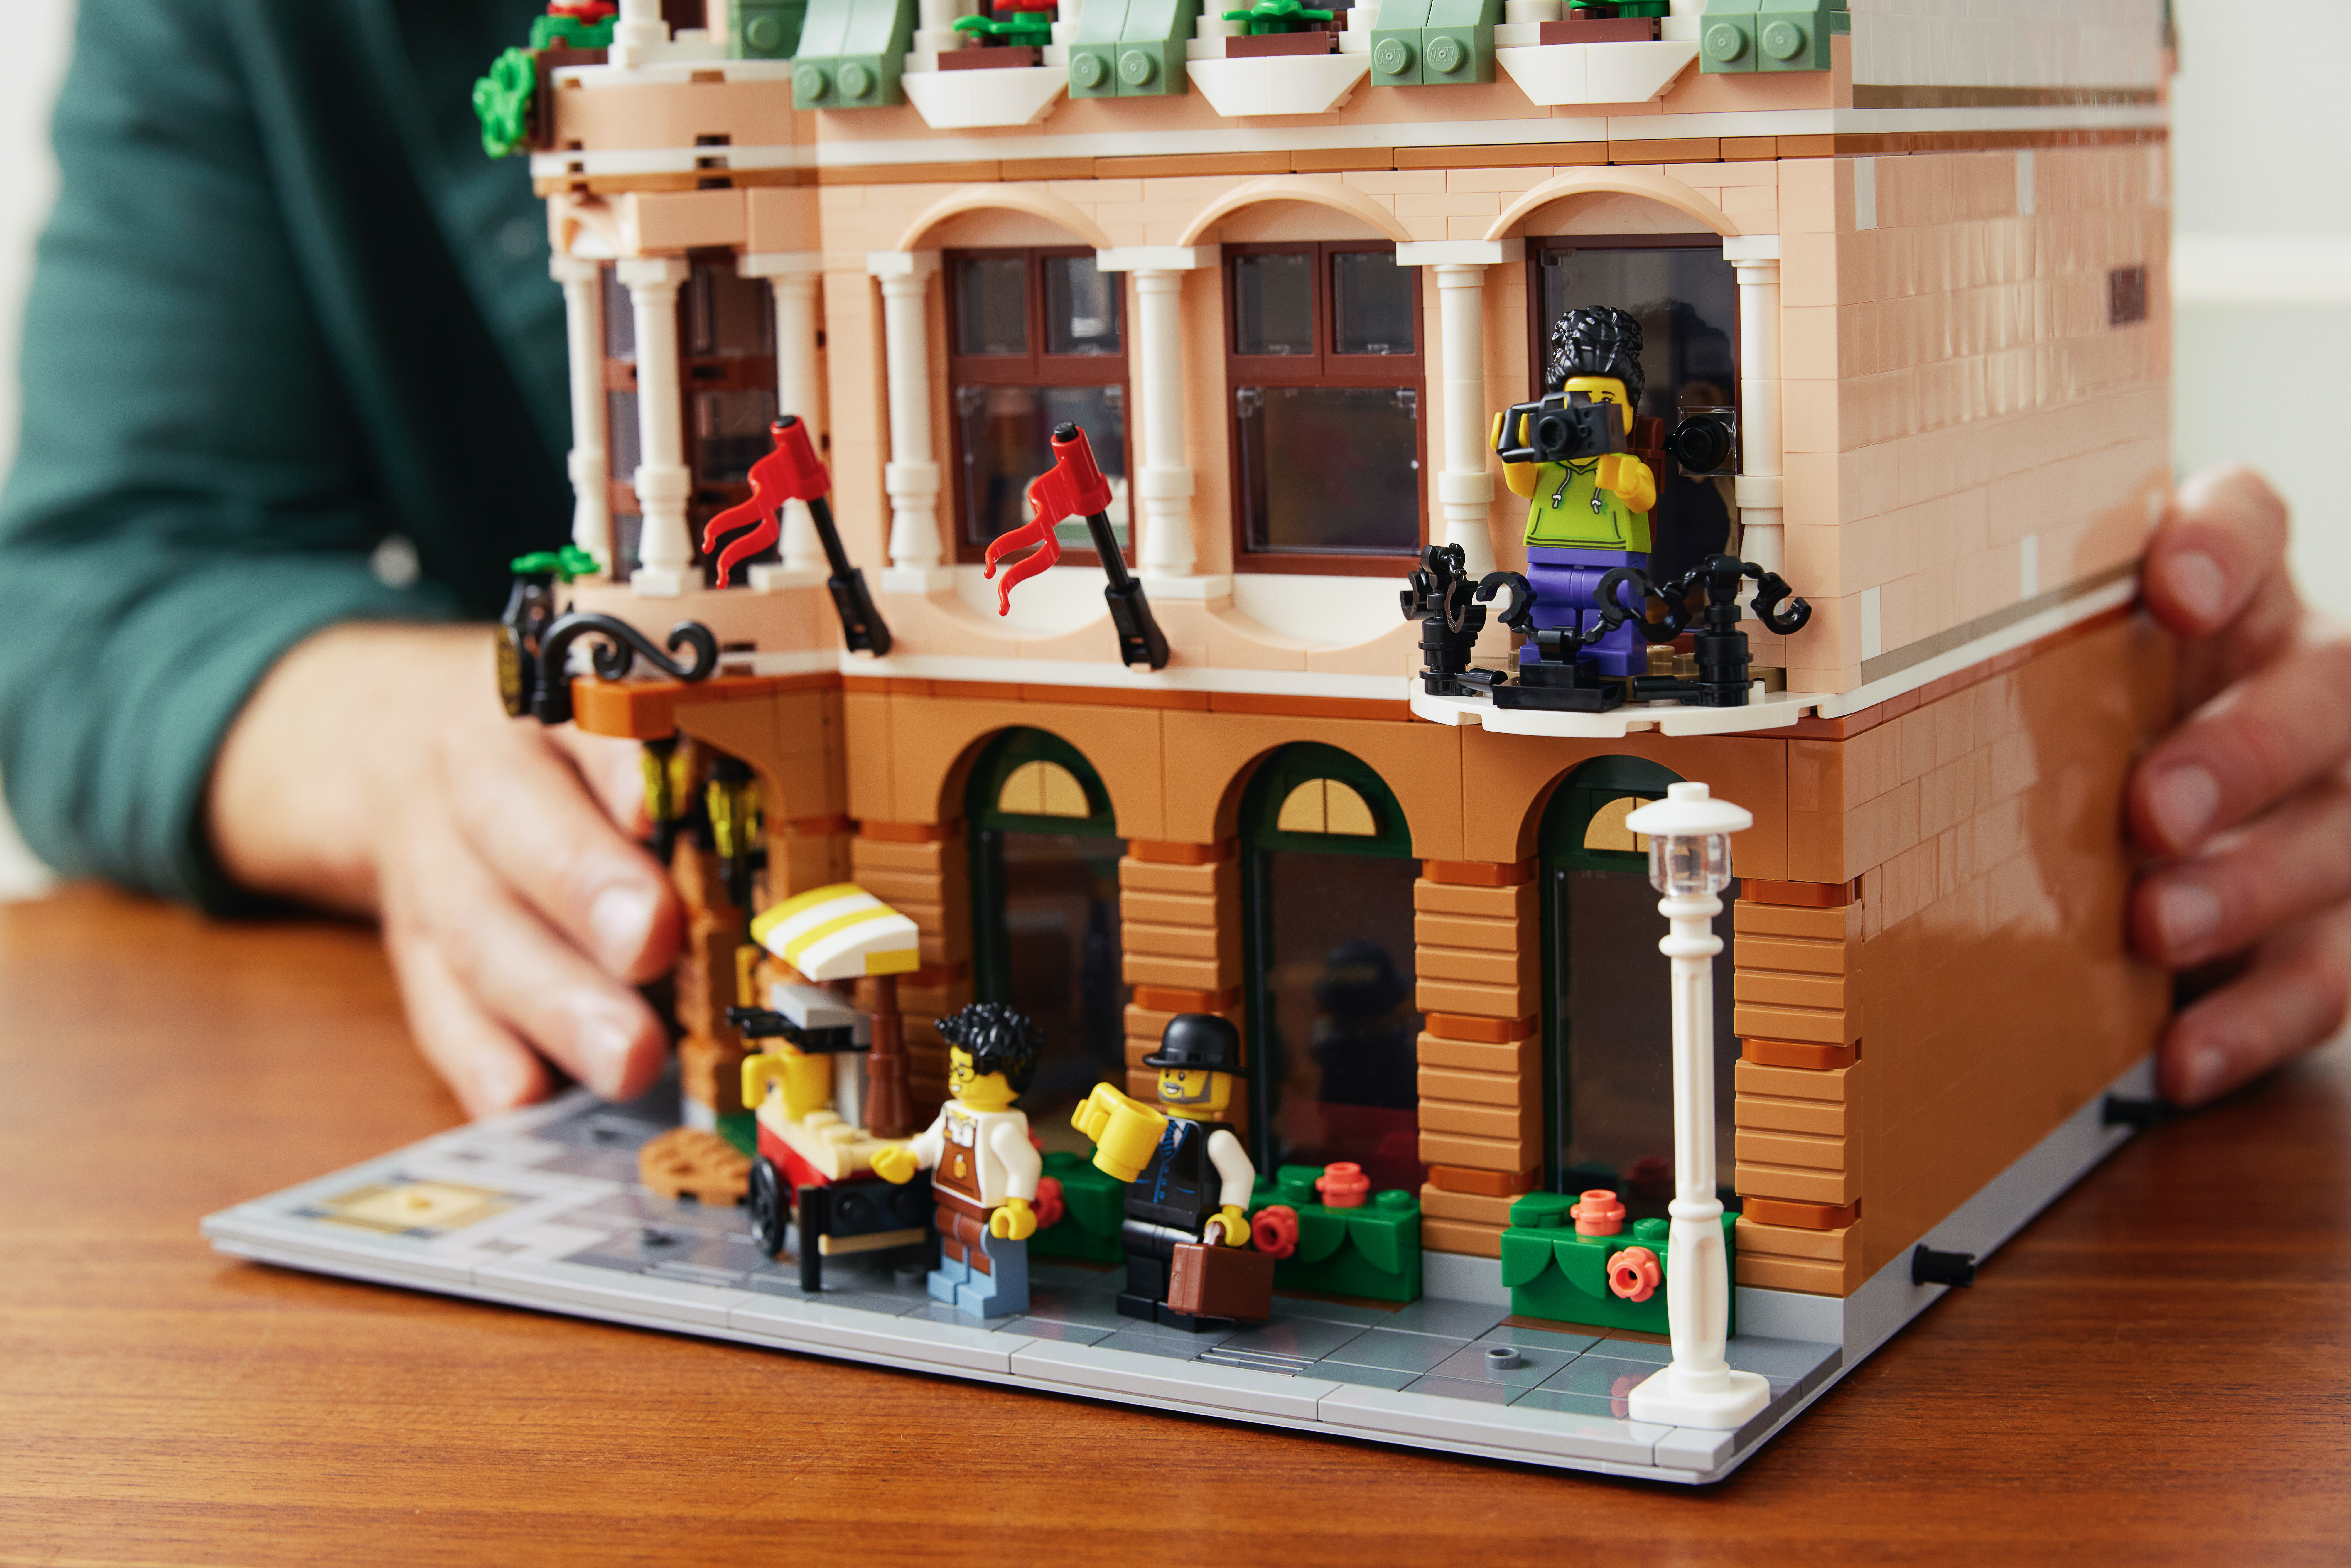 14 really Lego building sets for adults including some you may know exist - pennlive.com